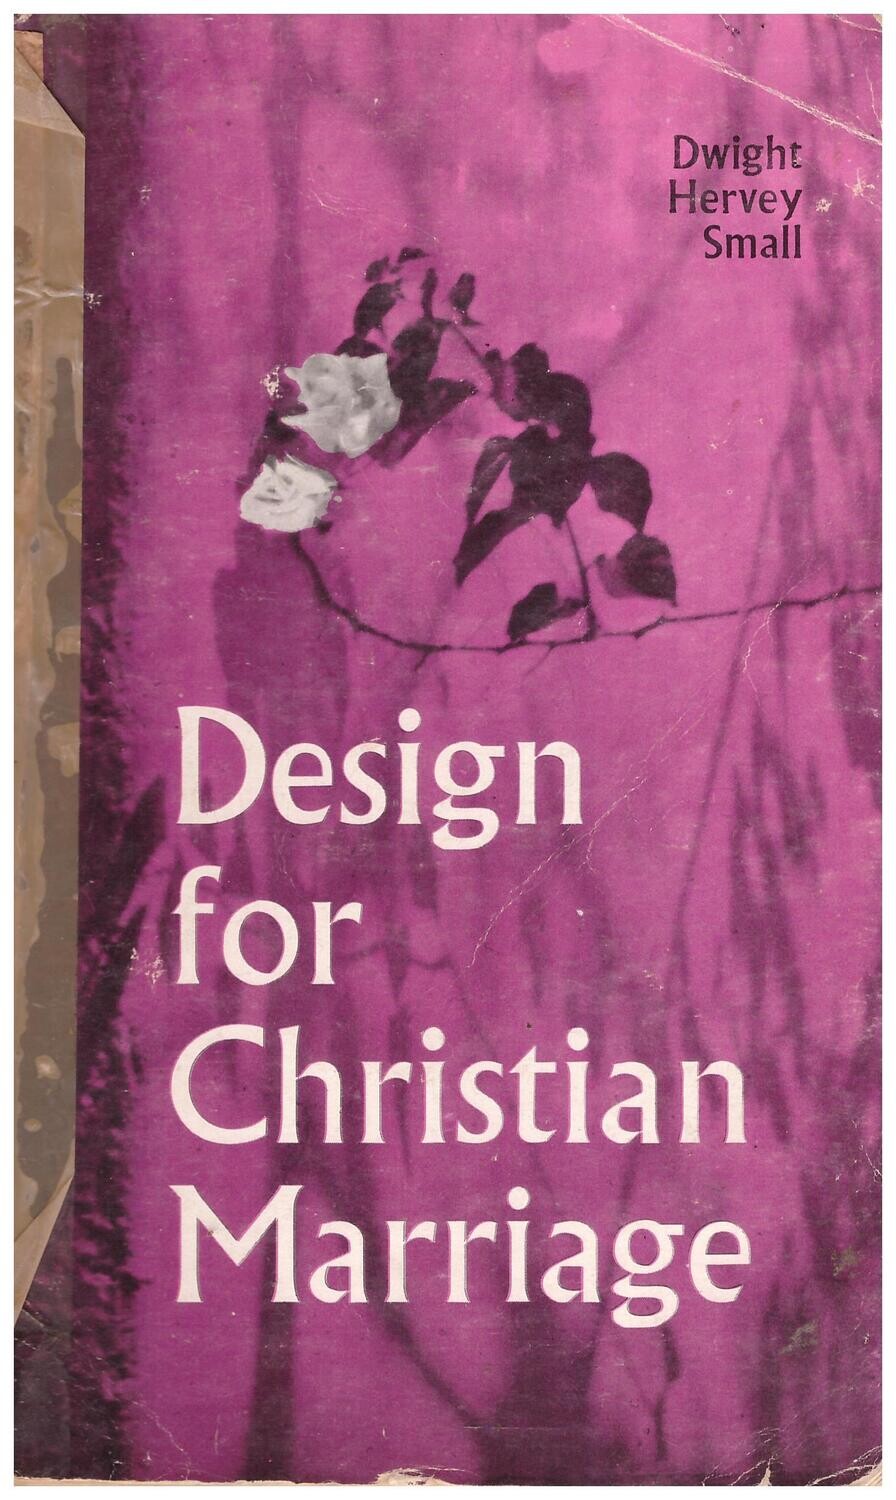 Design for christian marriage